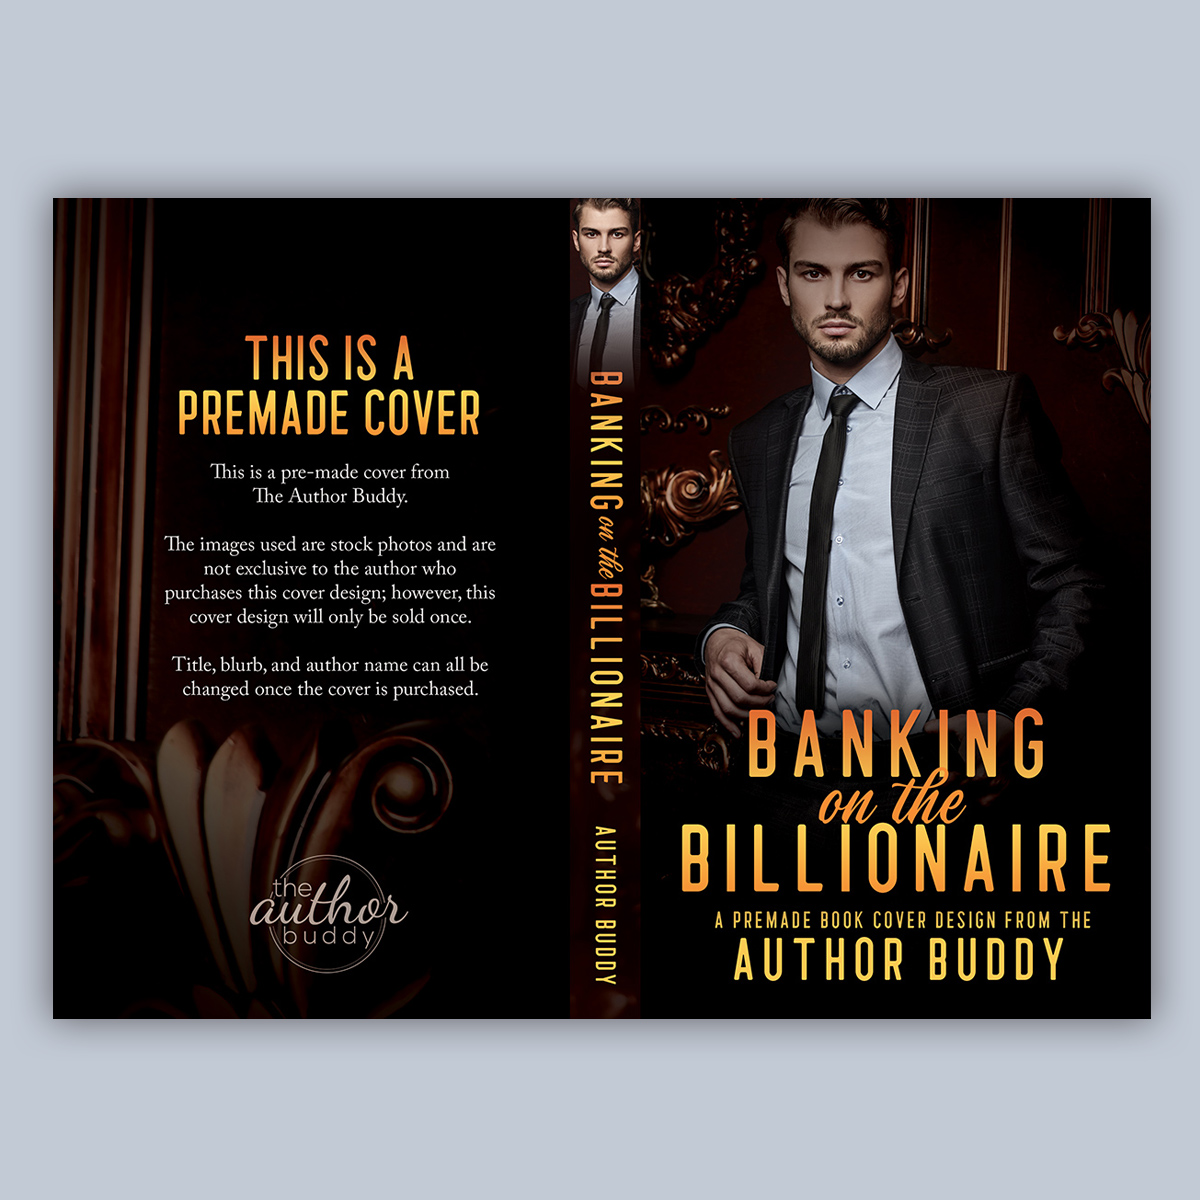 Banking on the Billionaire - Premade Billionaire Romance Book Cover from The Author Buddy